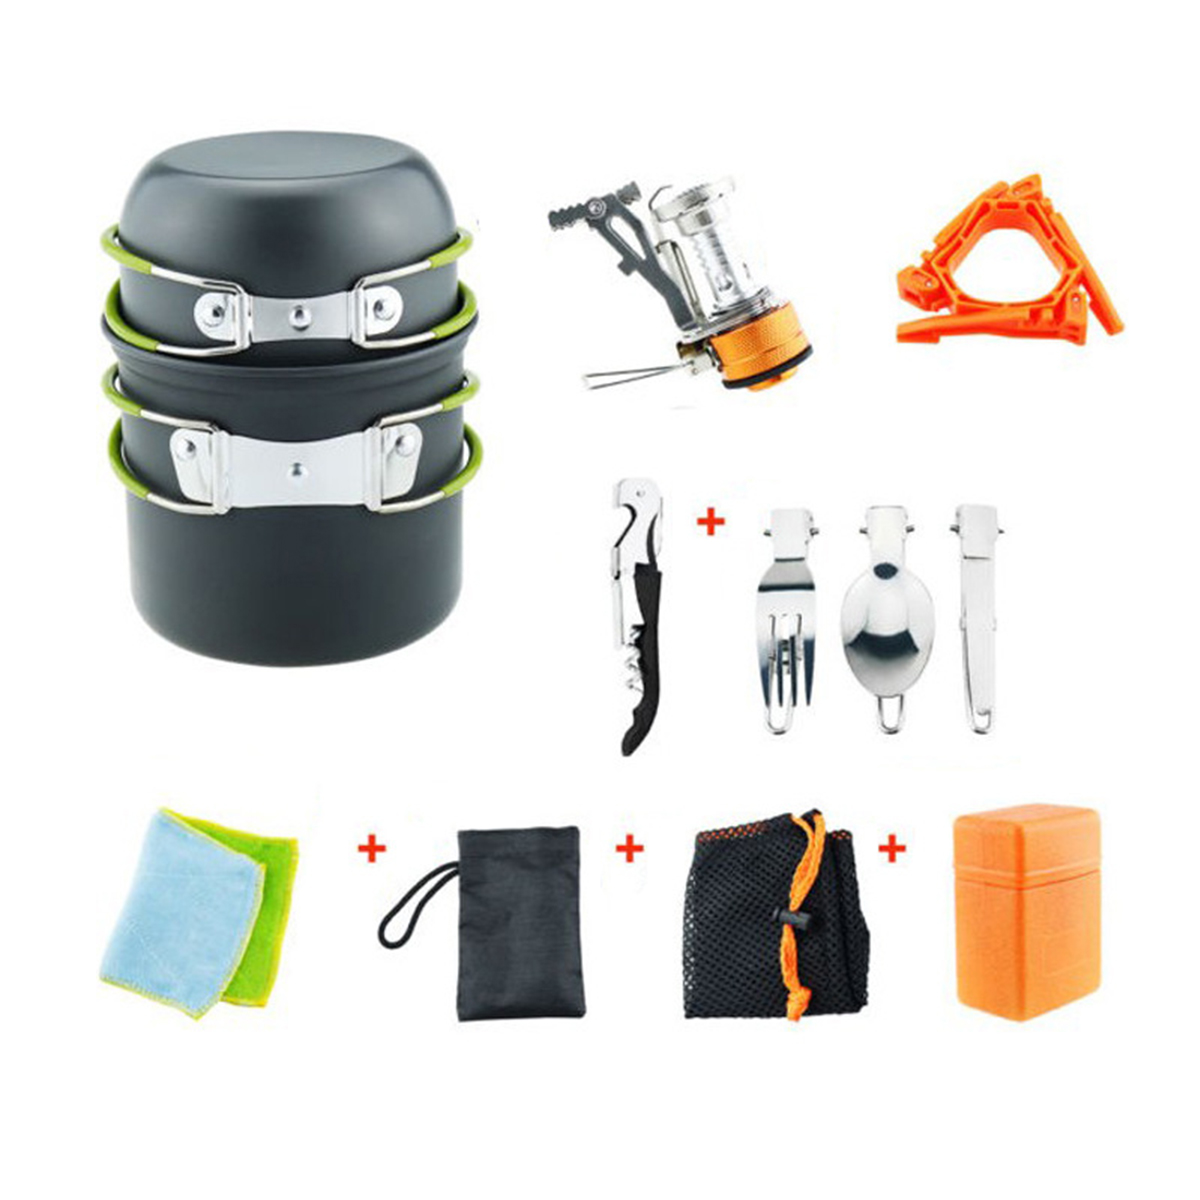 Find Portable Backpacking Outdoor Picnic Set Hiking Cookware Camping Pot Bowl Stove Set Burner for Sale on Gipsybee.com with cryptocurrencies